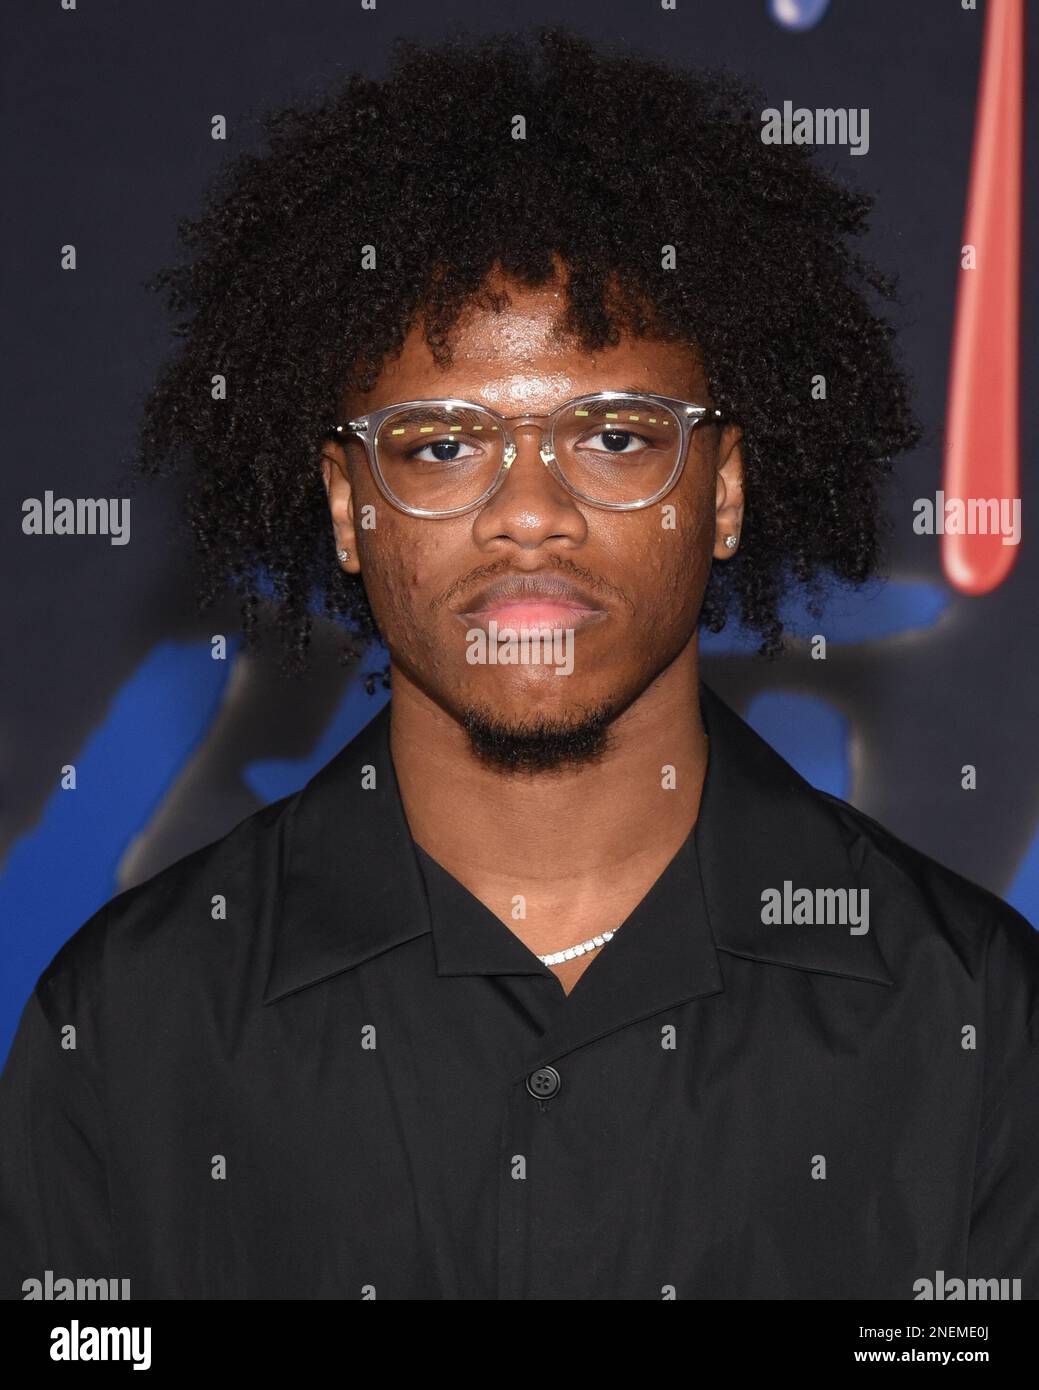 15 February 2023 - Burbank, California - Kamron Alexander. Red Carpet Premiere Event For The Sixth And Final Season Of FX's "Snowfall" at Academy Museum of Motion Pictures, Ted Mann Theater. Photo Credit: Billy Bennight/AdMedia/Sipa USA Stock Photo